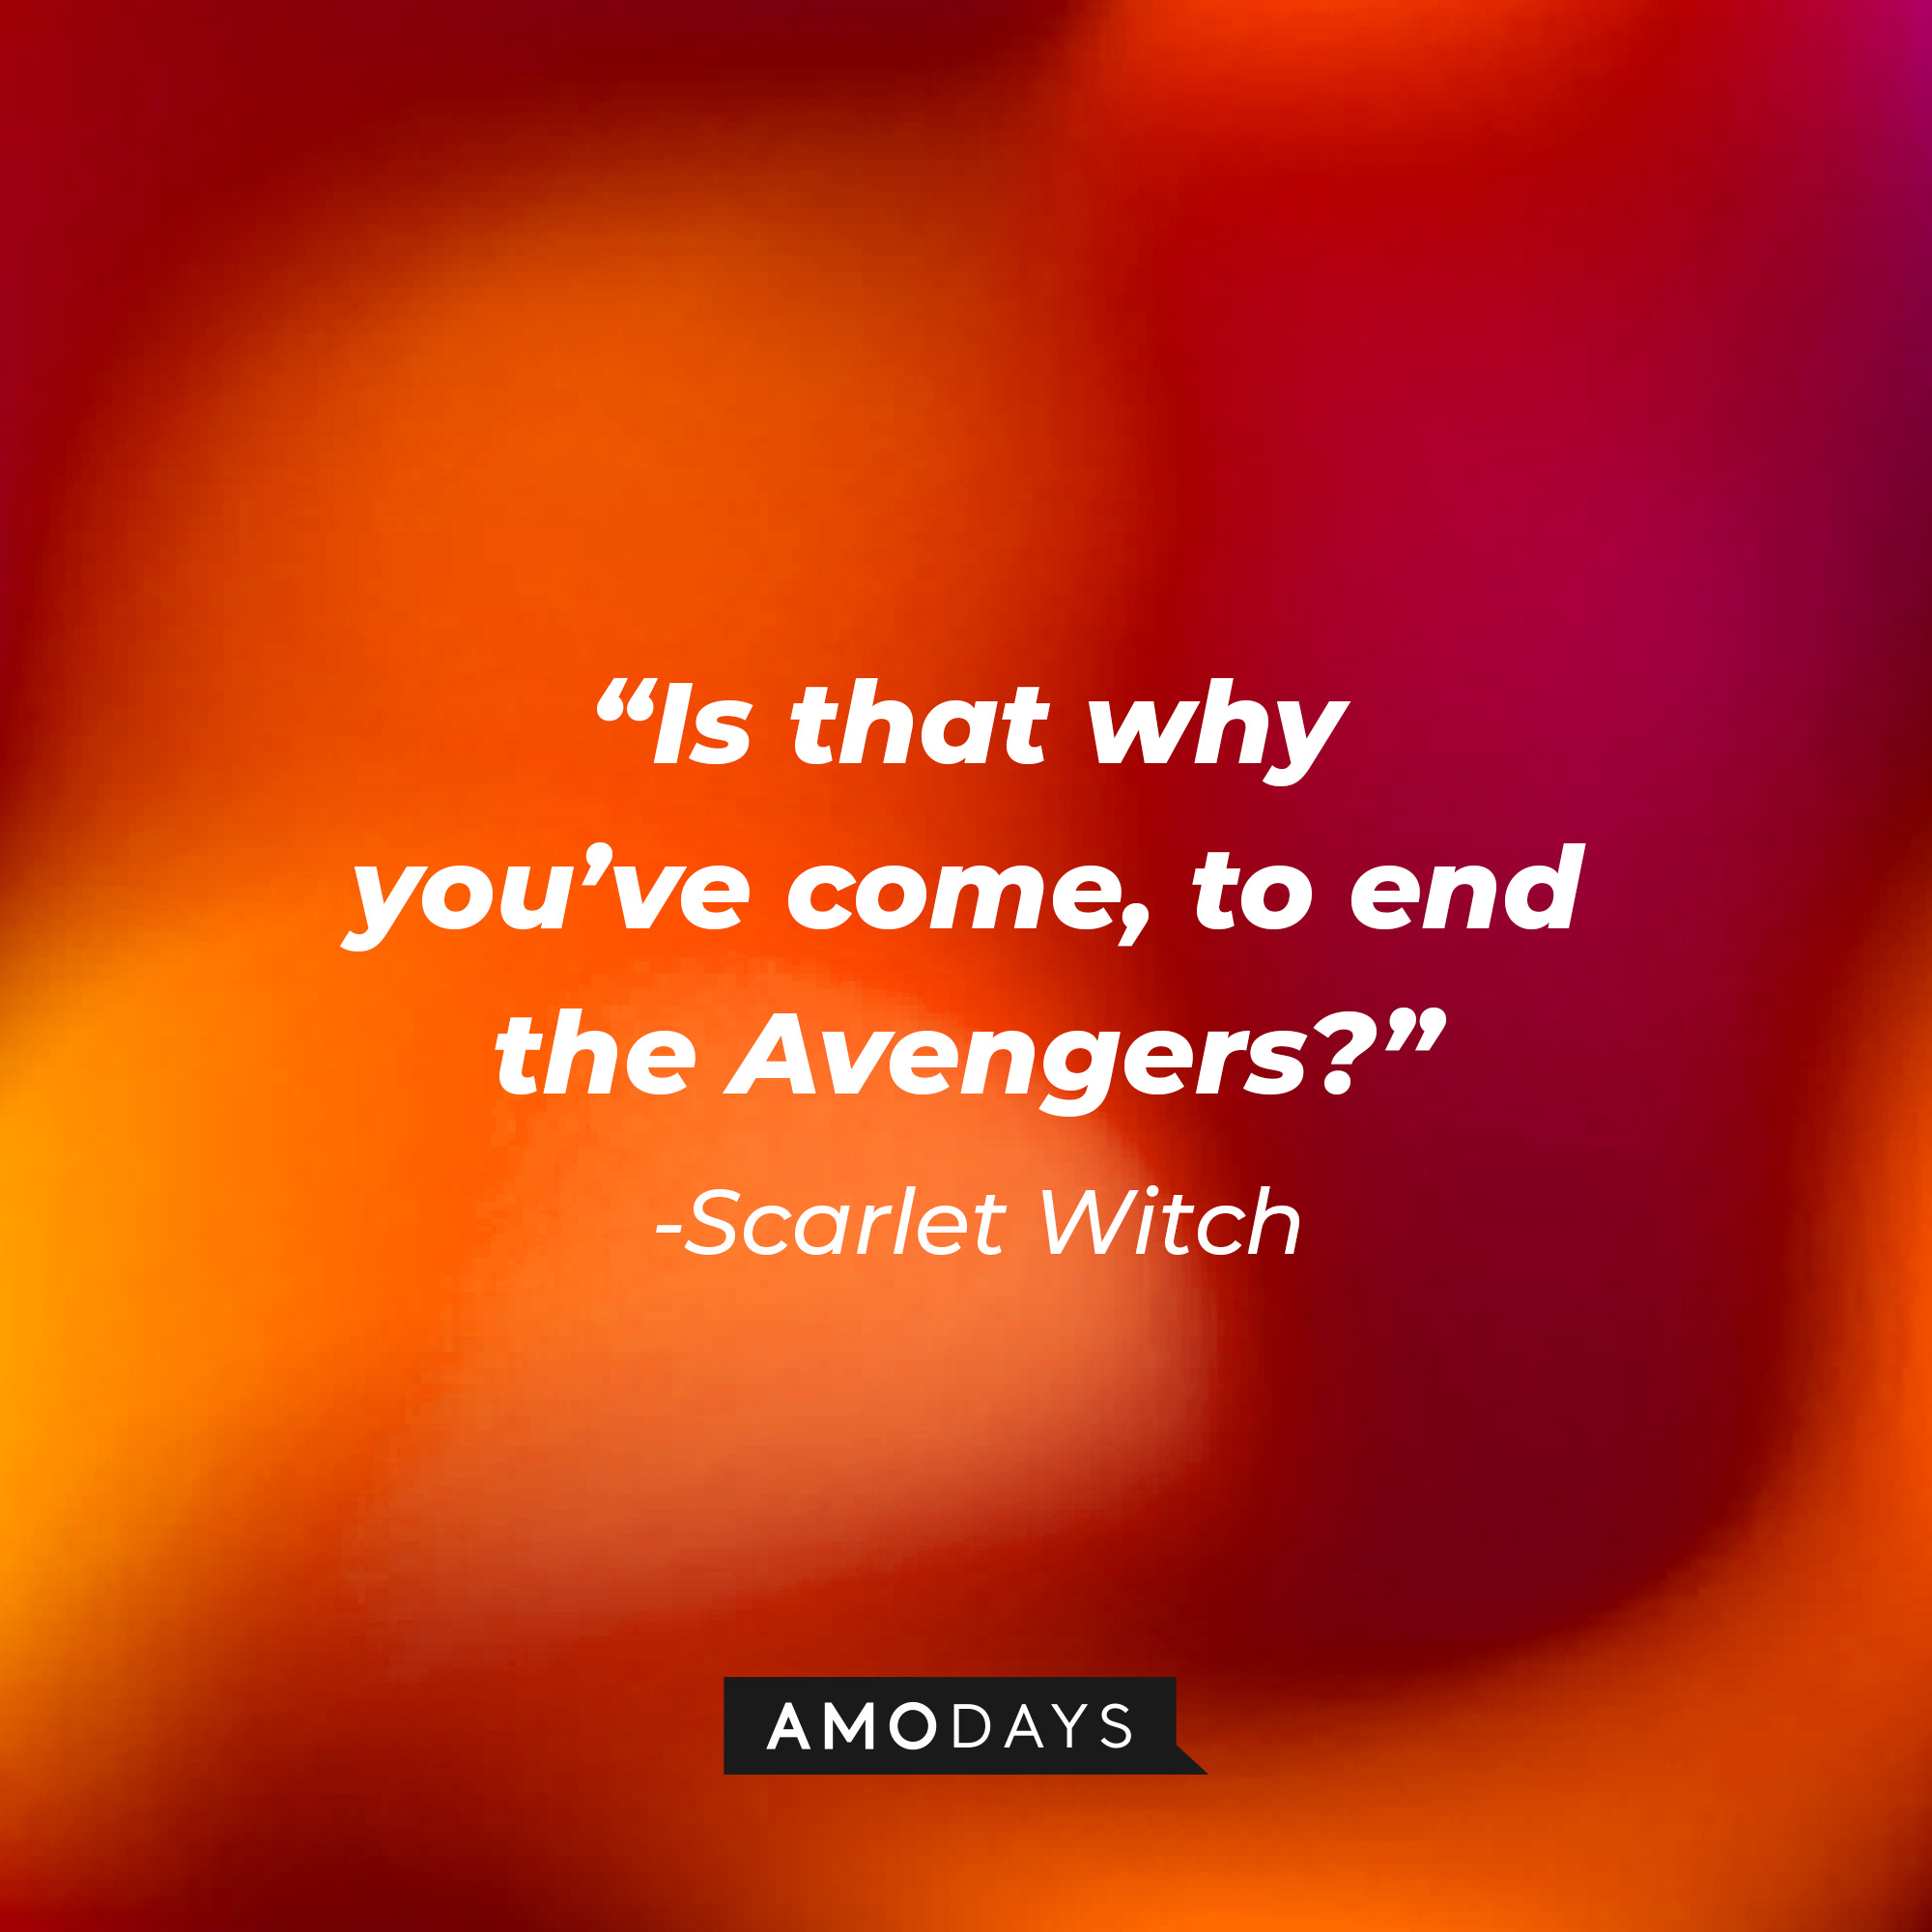 Scarlet Witch’s quote: “Is that why you’ve come, to end the Avengers?” | Source: AmoDays